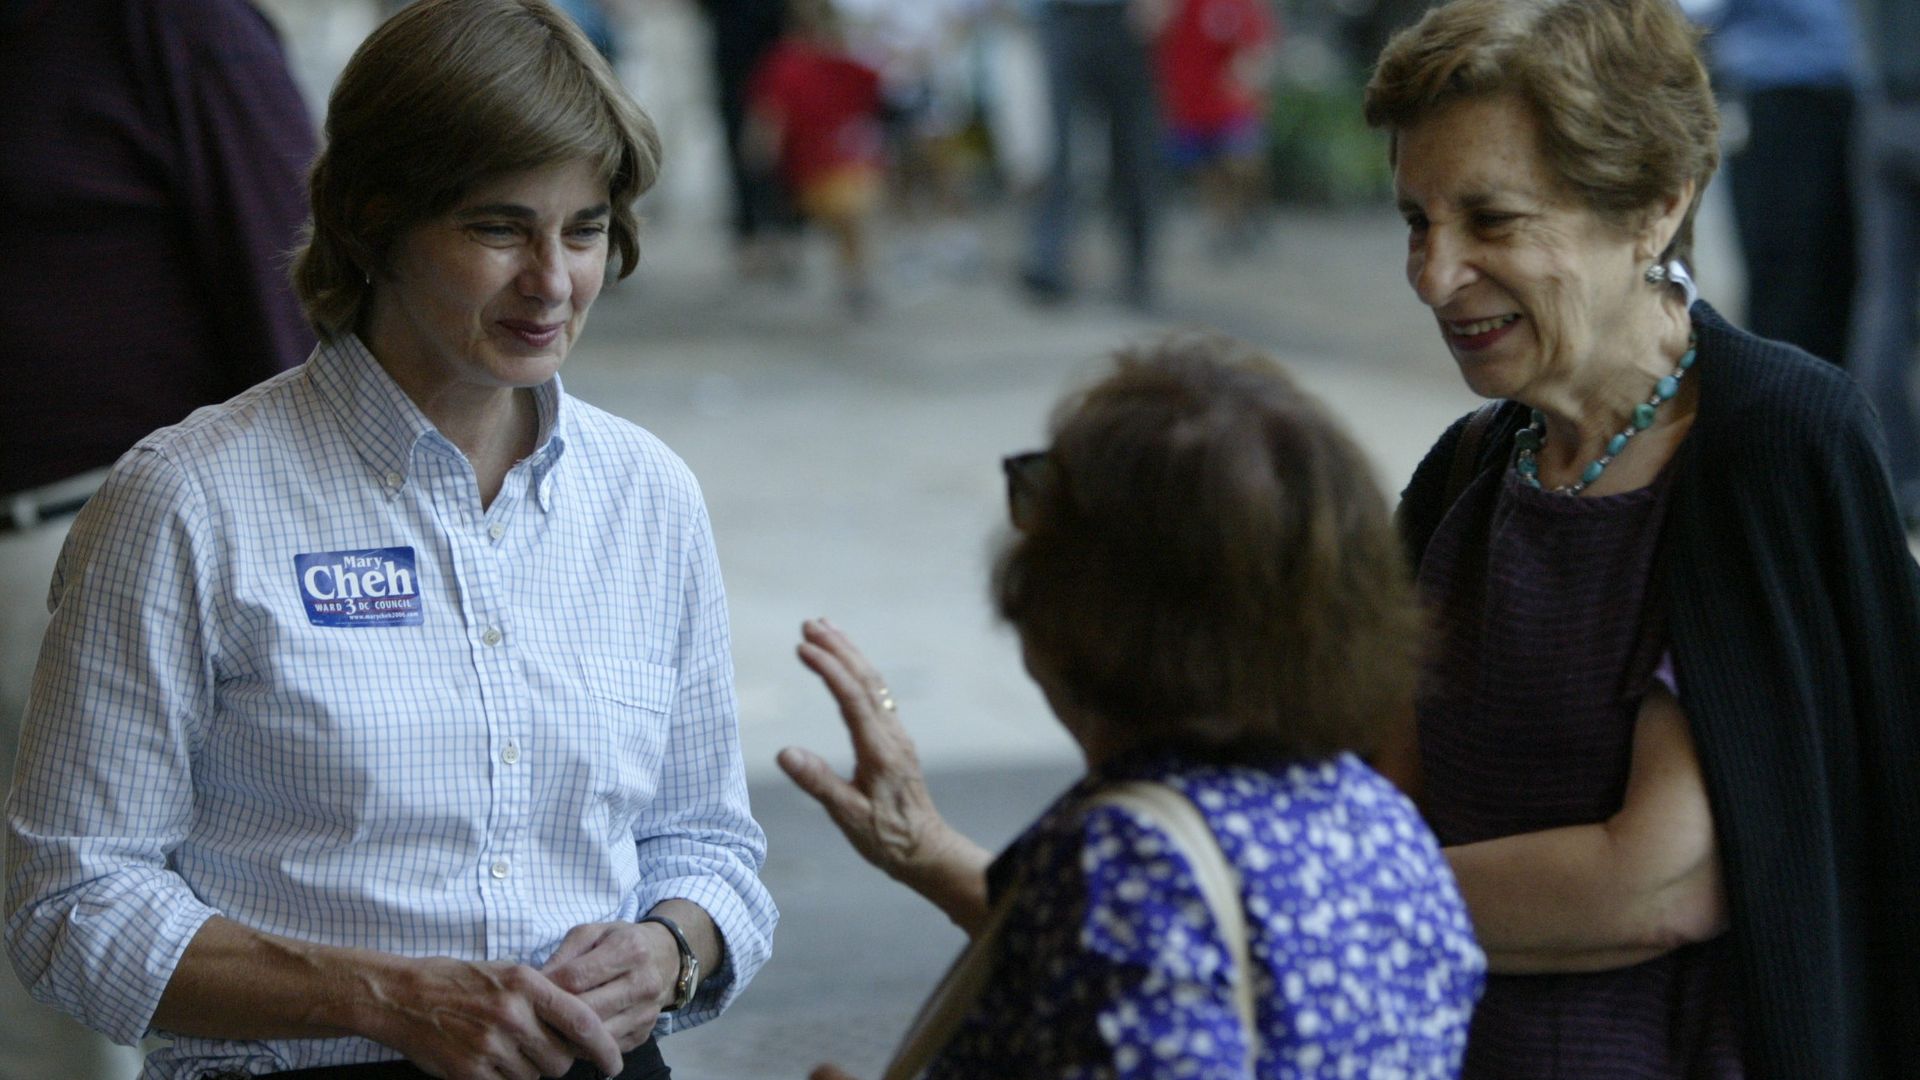 Mary Cheh campaigning in 2006.